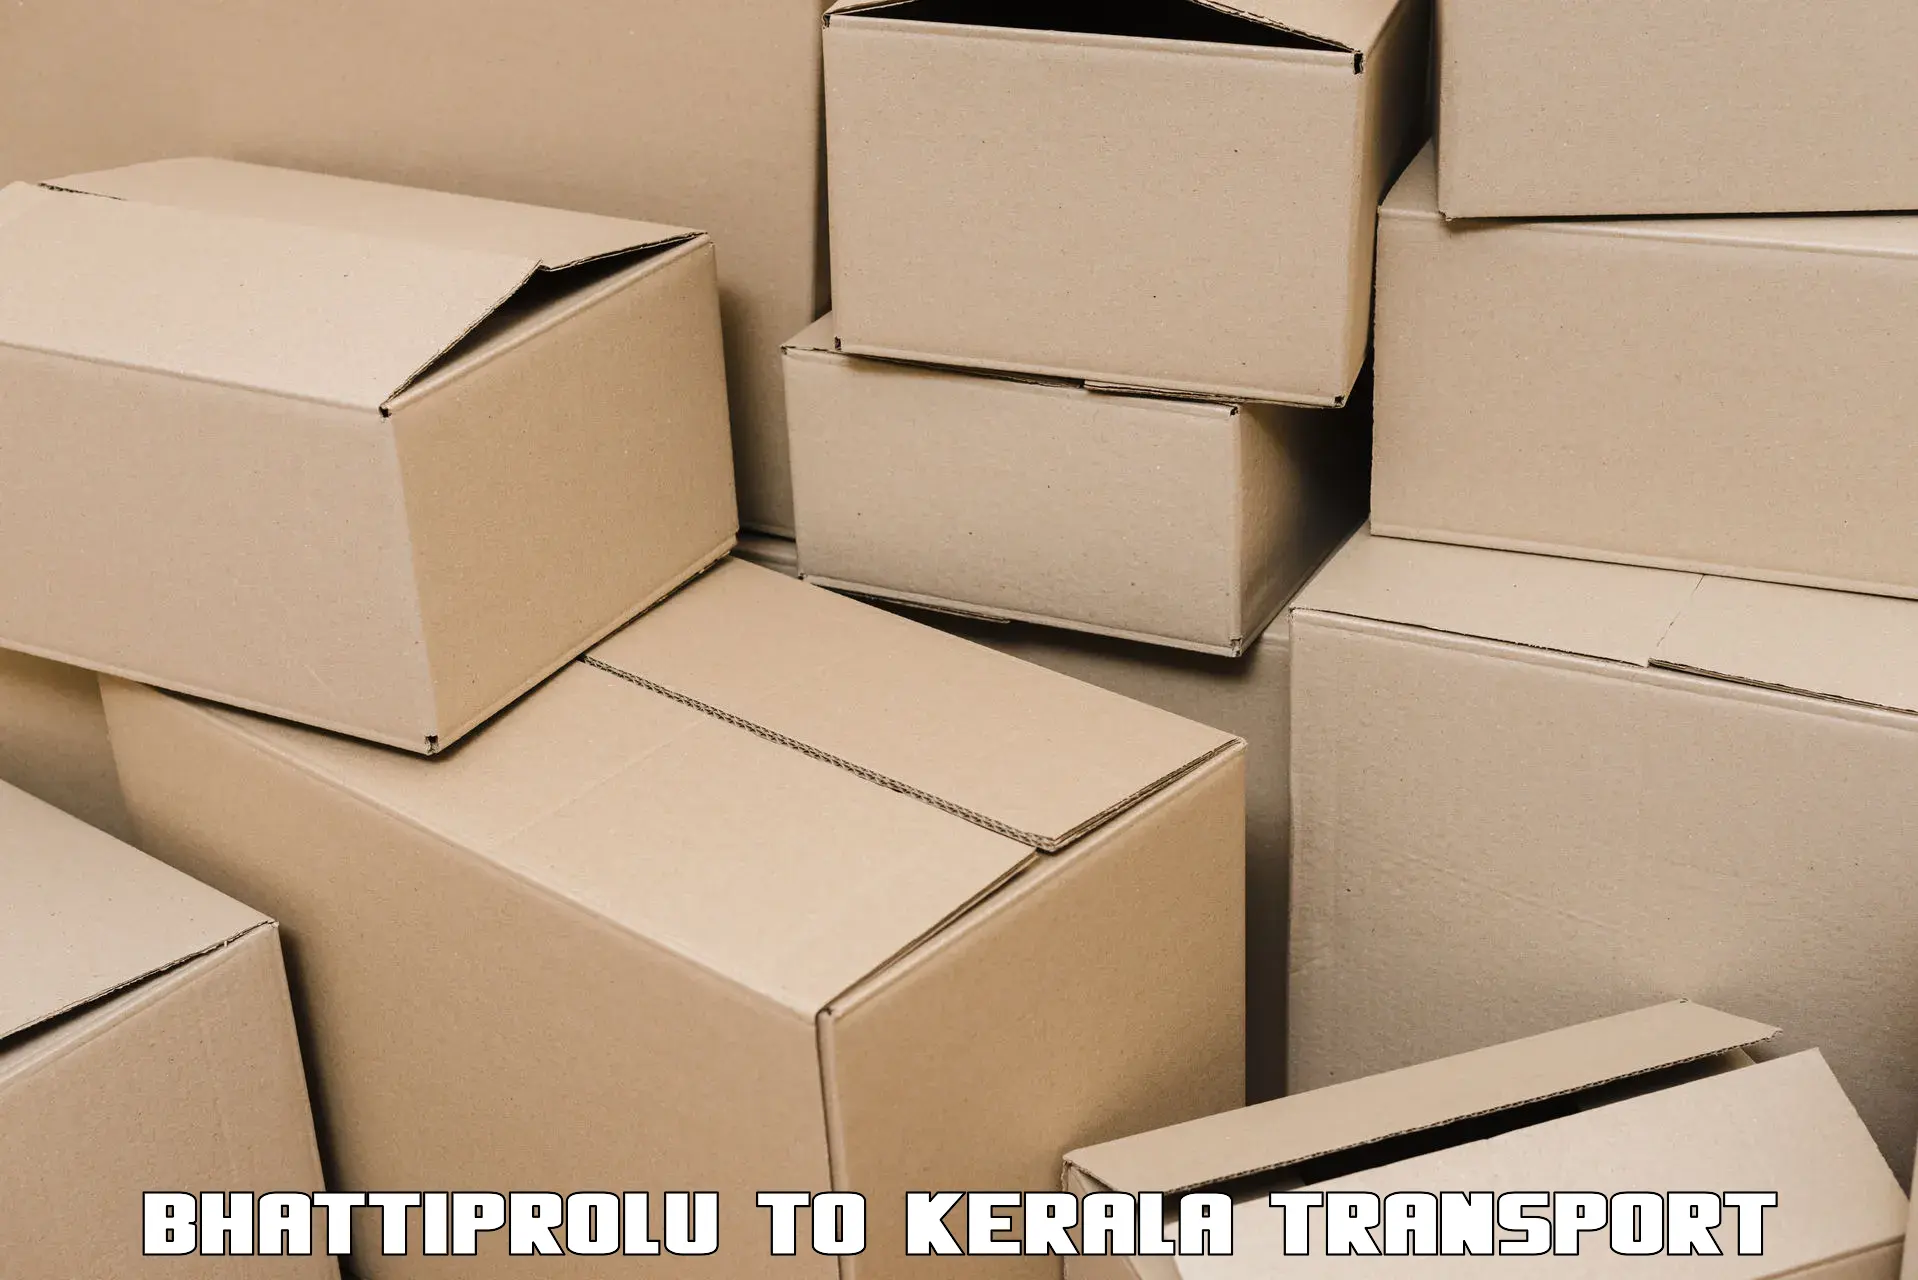 Commercial transport service Bhattiprolu to Tirur